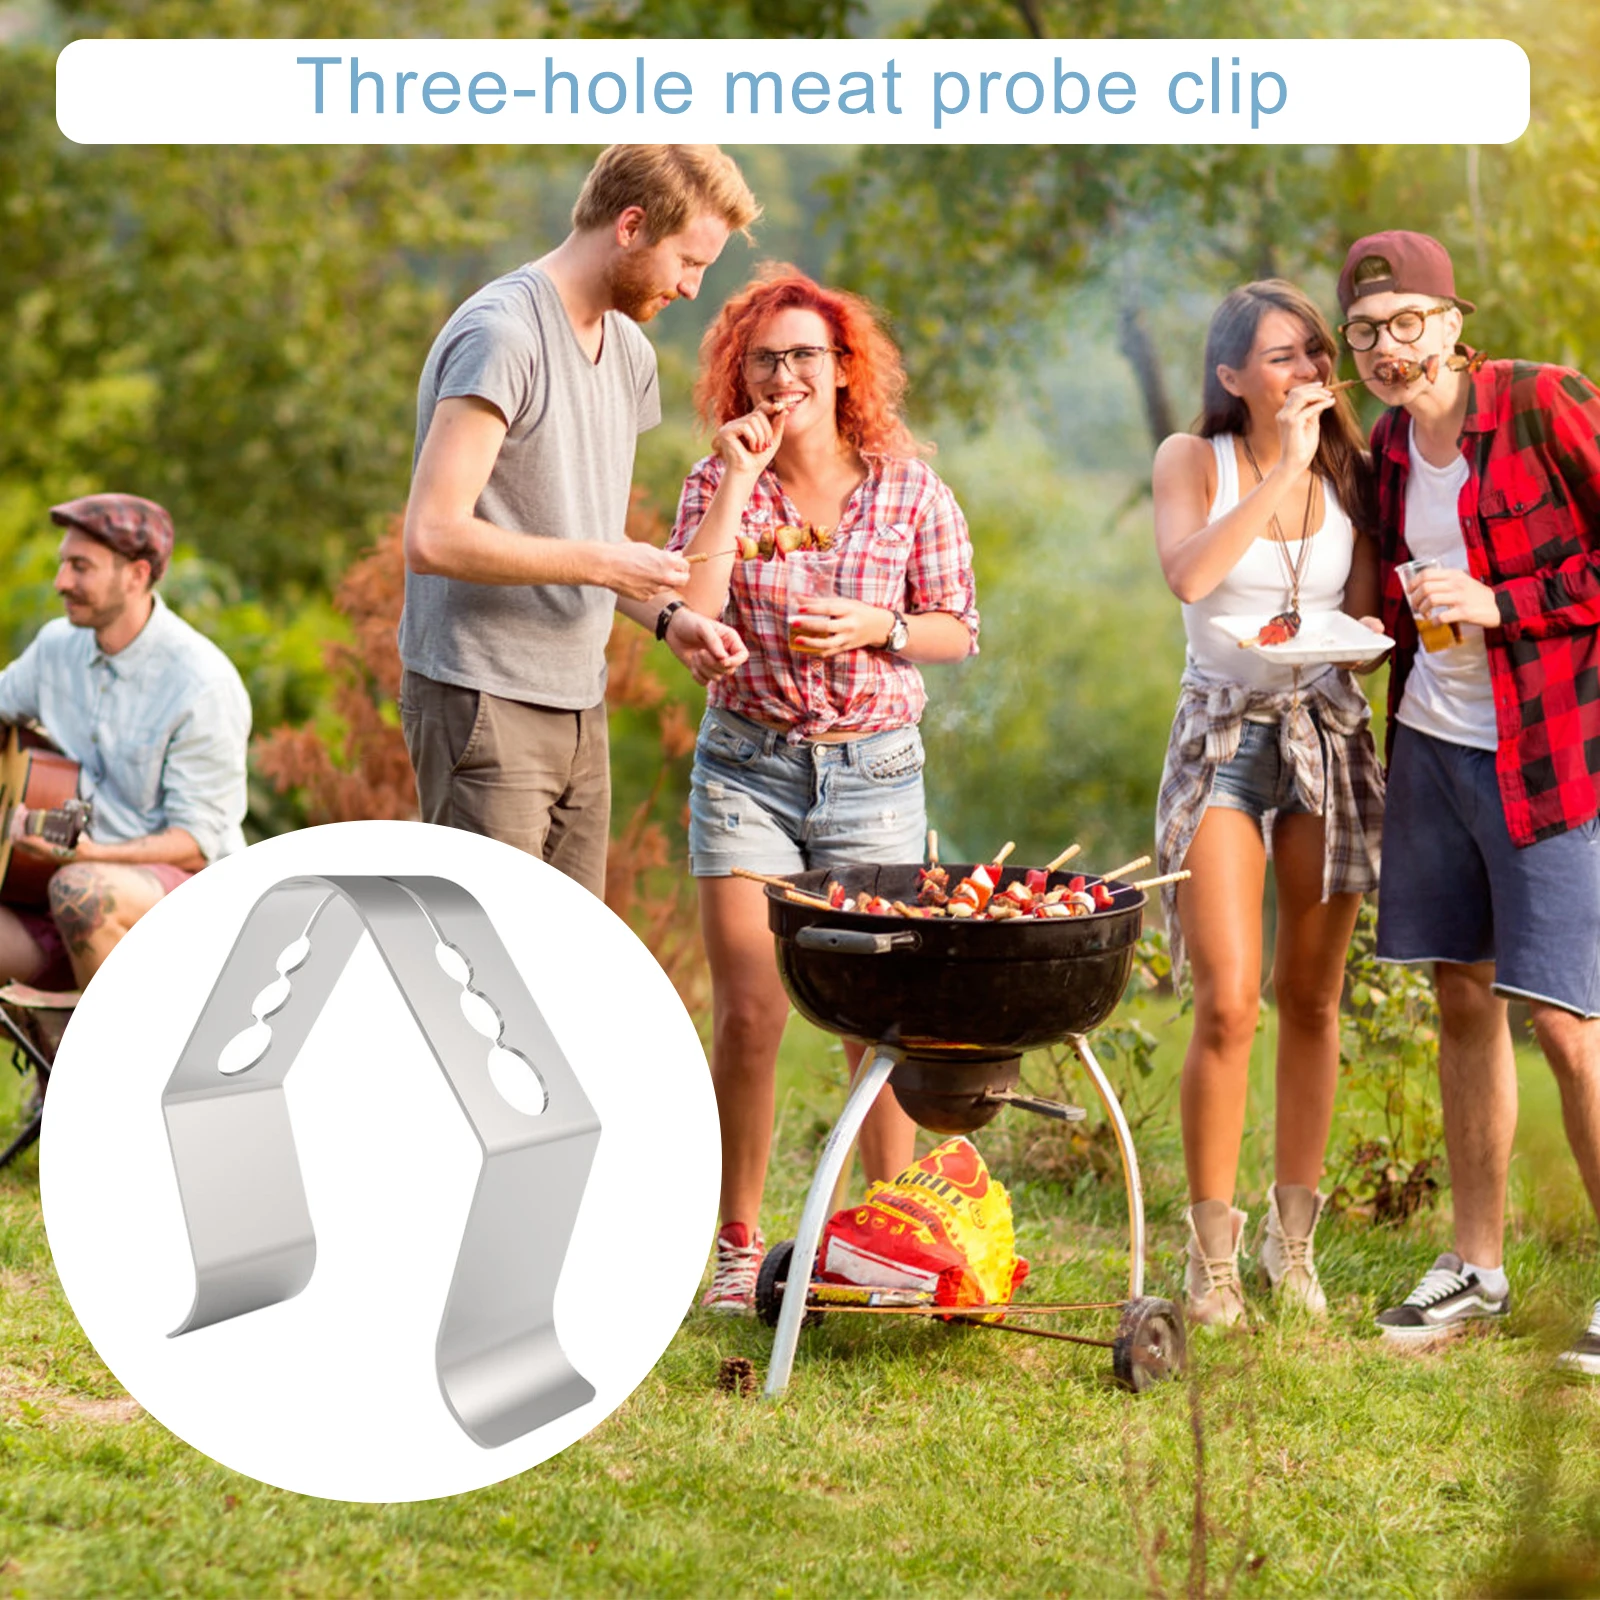 6 Pieces Grill Thermometer Probe Clip Holder for BBQ Smoker，Universal  Upgraded Stainless Steel Barbecue Temp Probe Clip